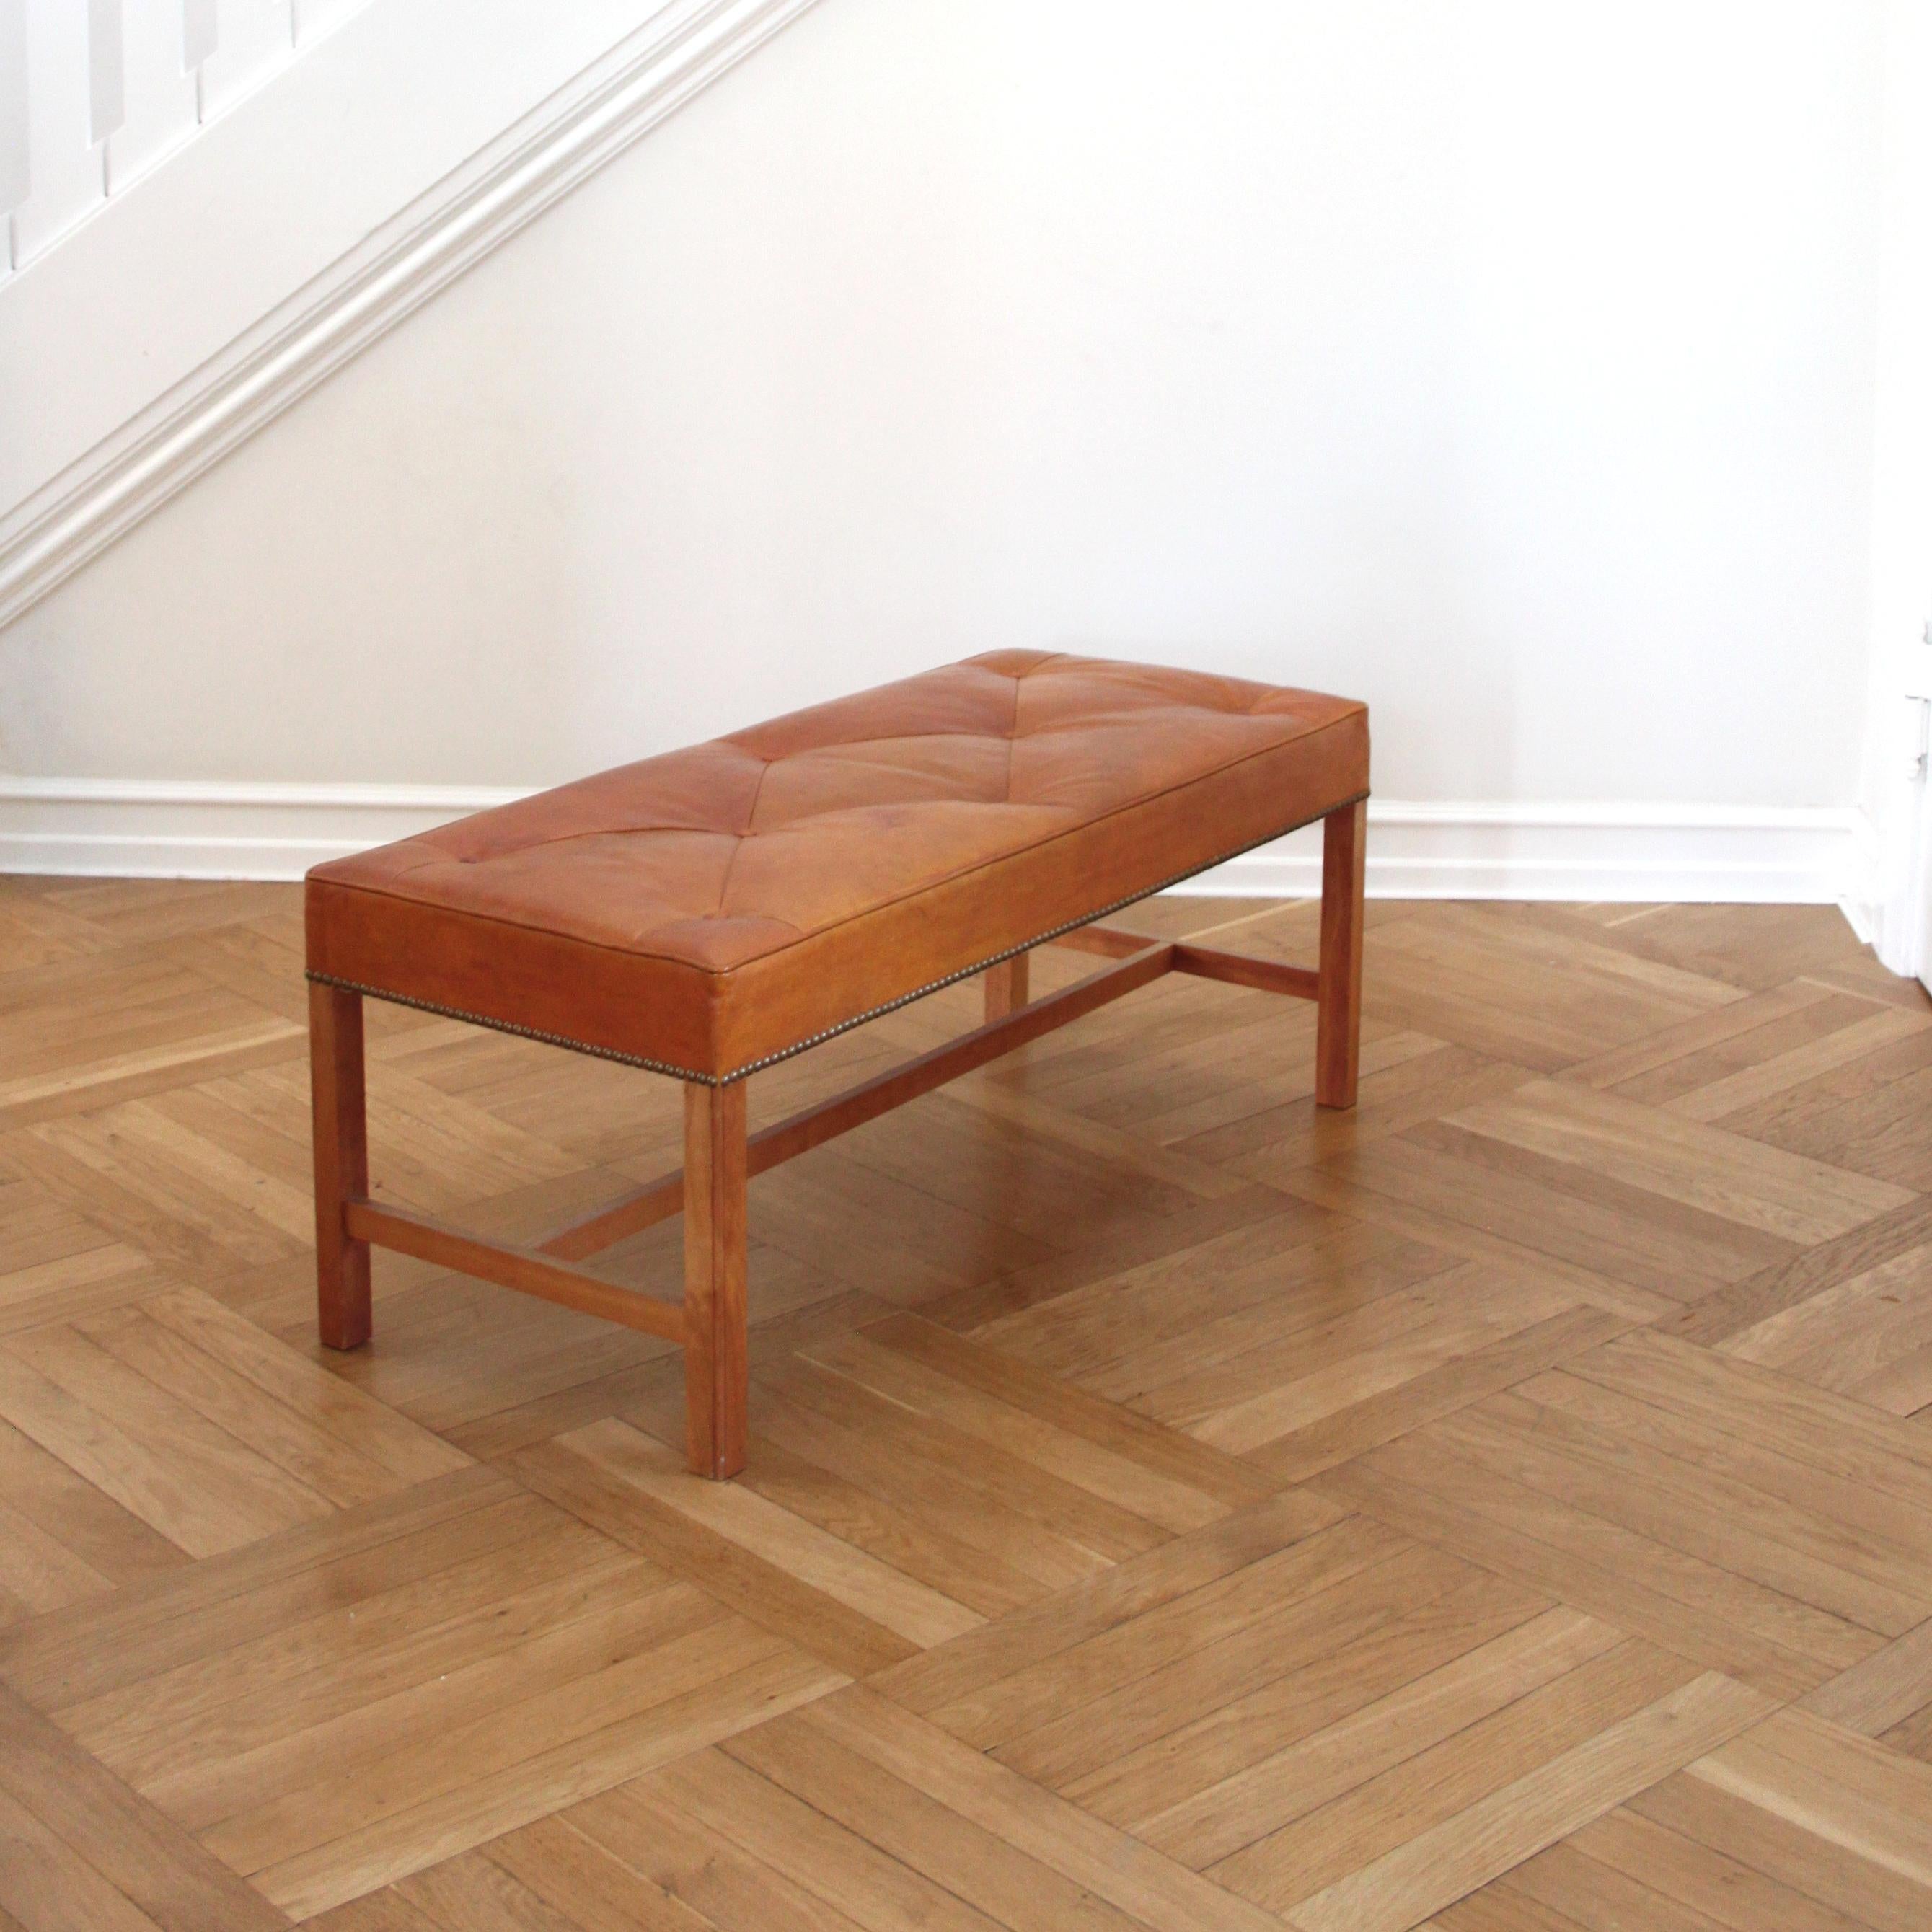 Scandinavian Modern Josef Frank Bench in Mahogany and Niger Leather, Sweden 1950s